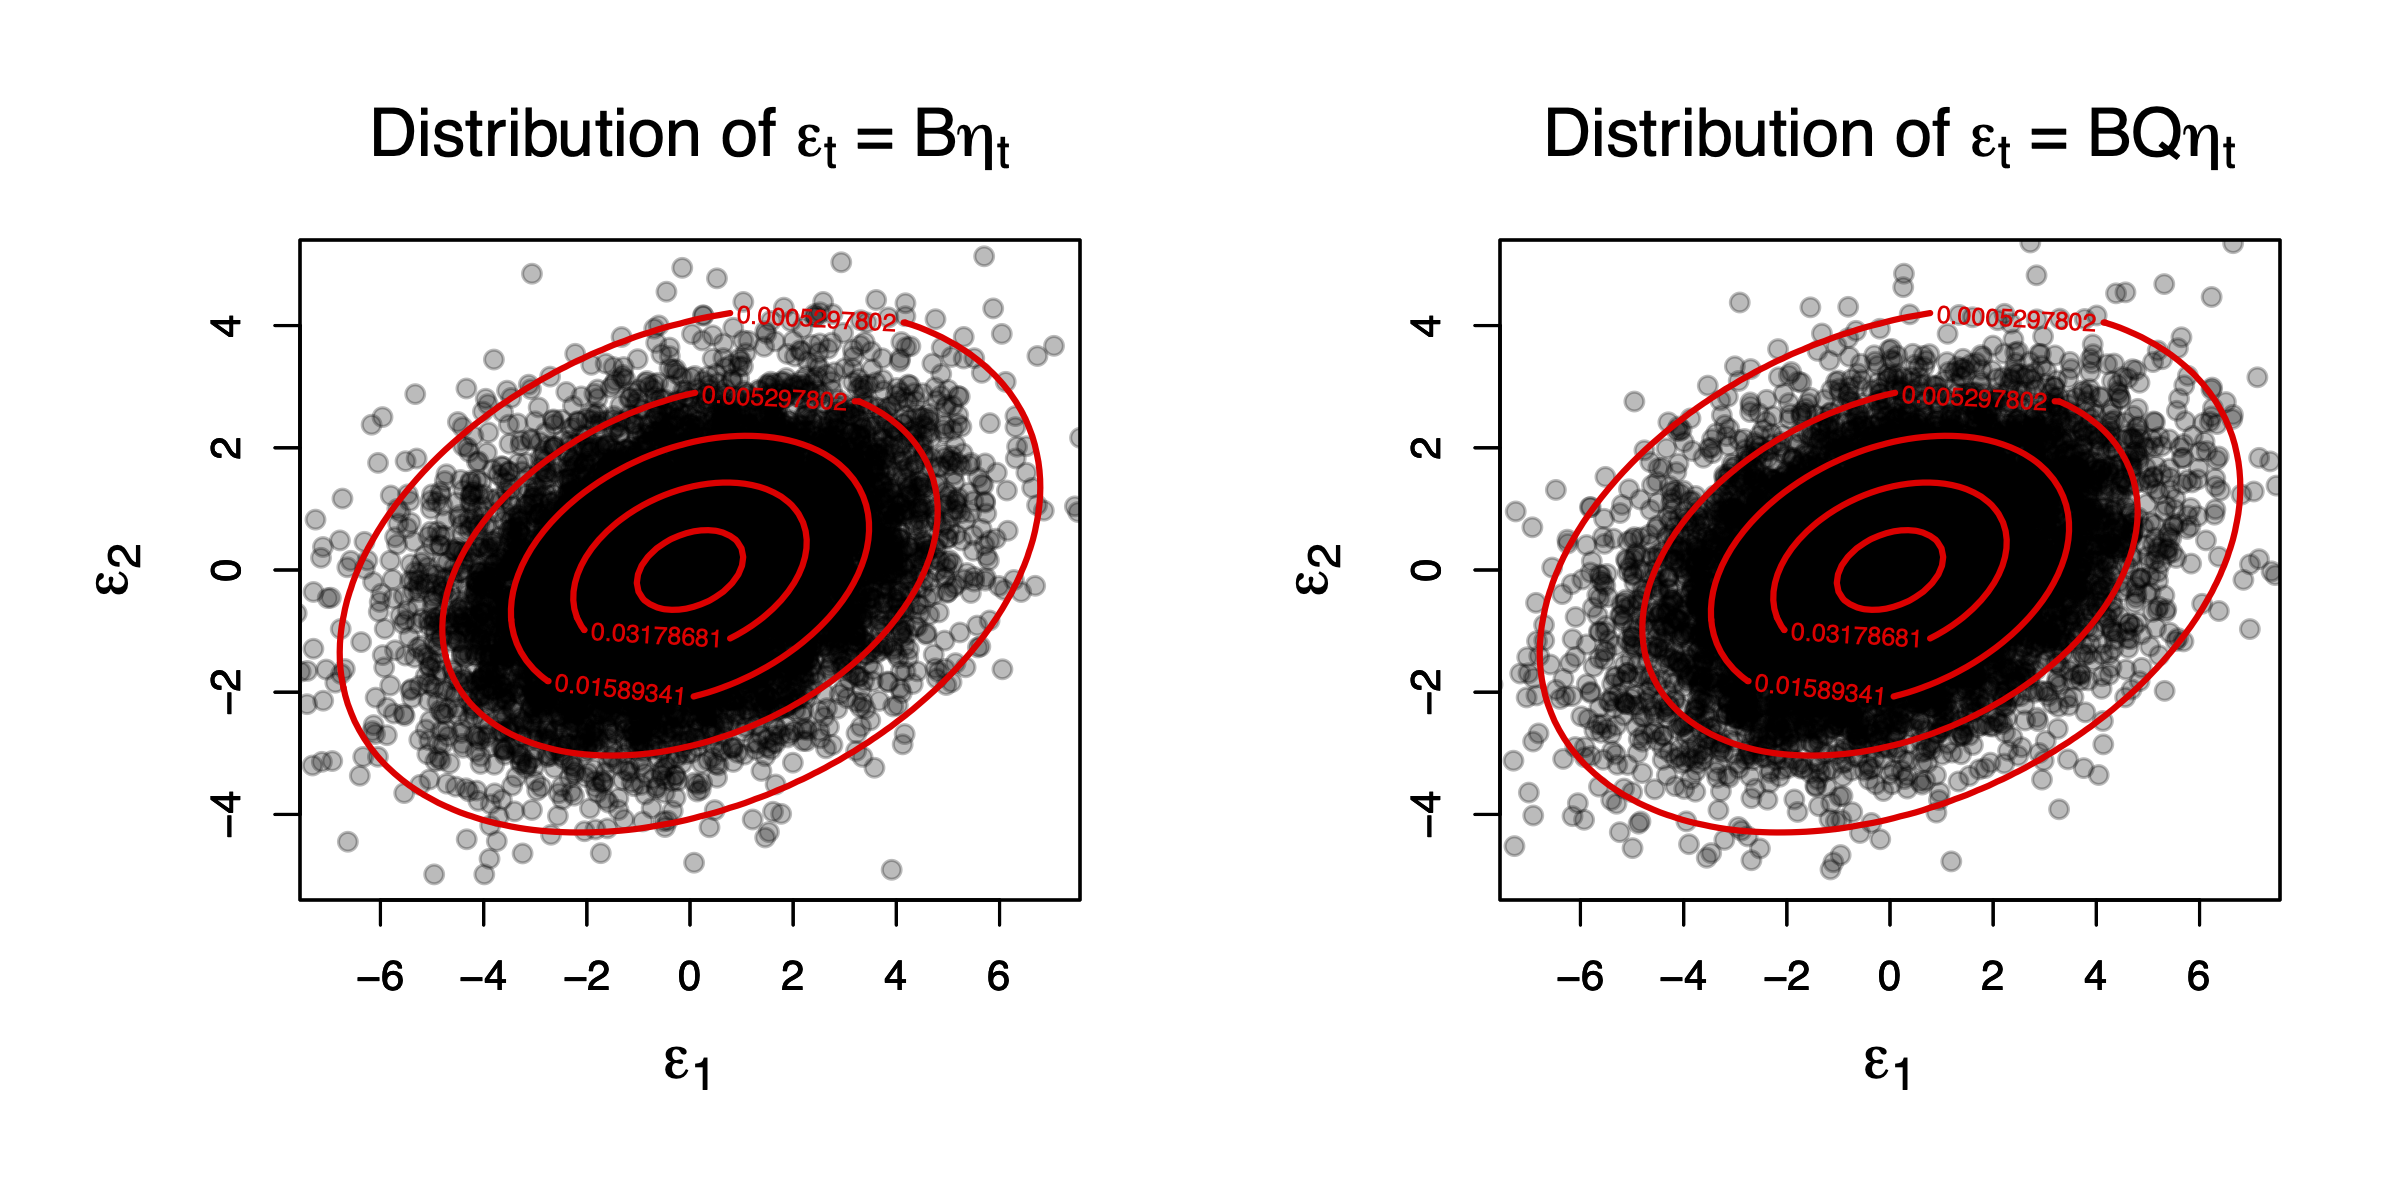 This figure compares the distributions of two Gaussian bivariate vectors, $B \eta_t$ and $BQ\eta_t$, where $\eta_{t} \sim \mathcal{N}(0,Id)$ (therefore $\eta_{1,t}$ and $\eta_{2,t}$ are independent), and $Q$  is an orthogonal matrix.